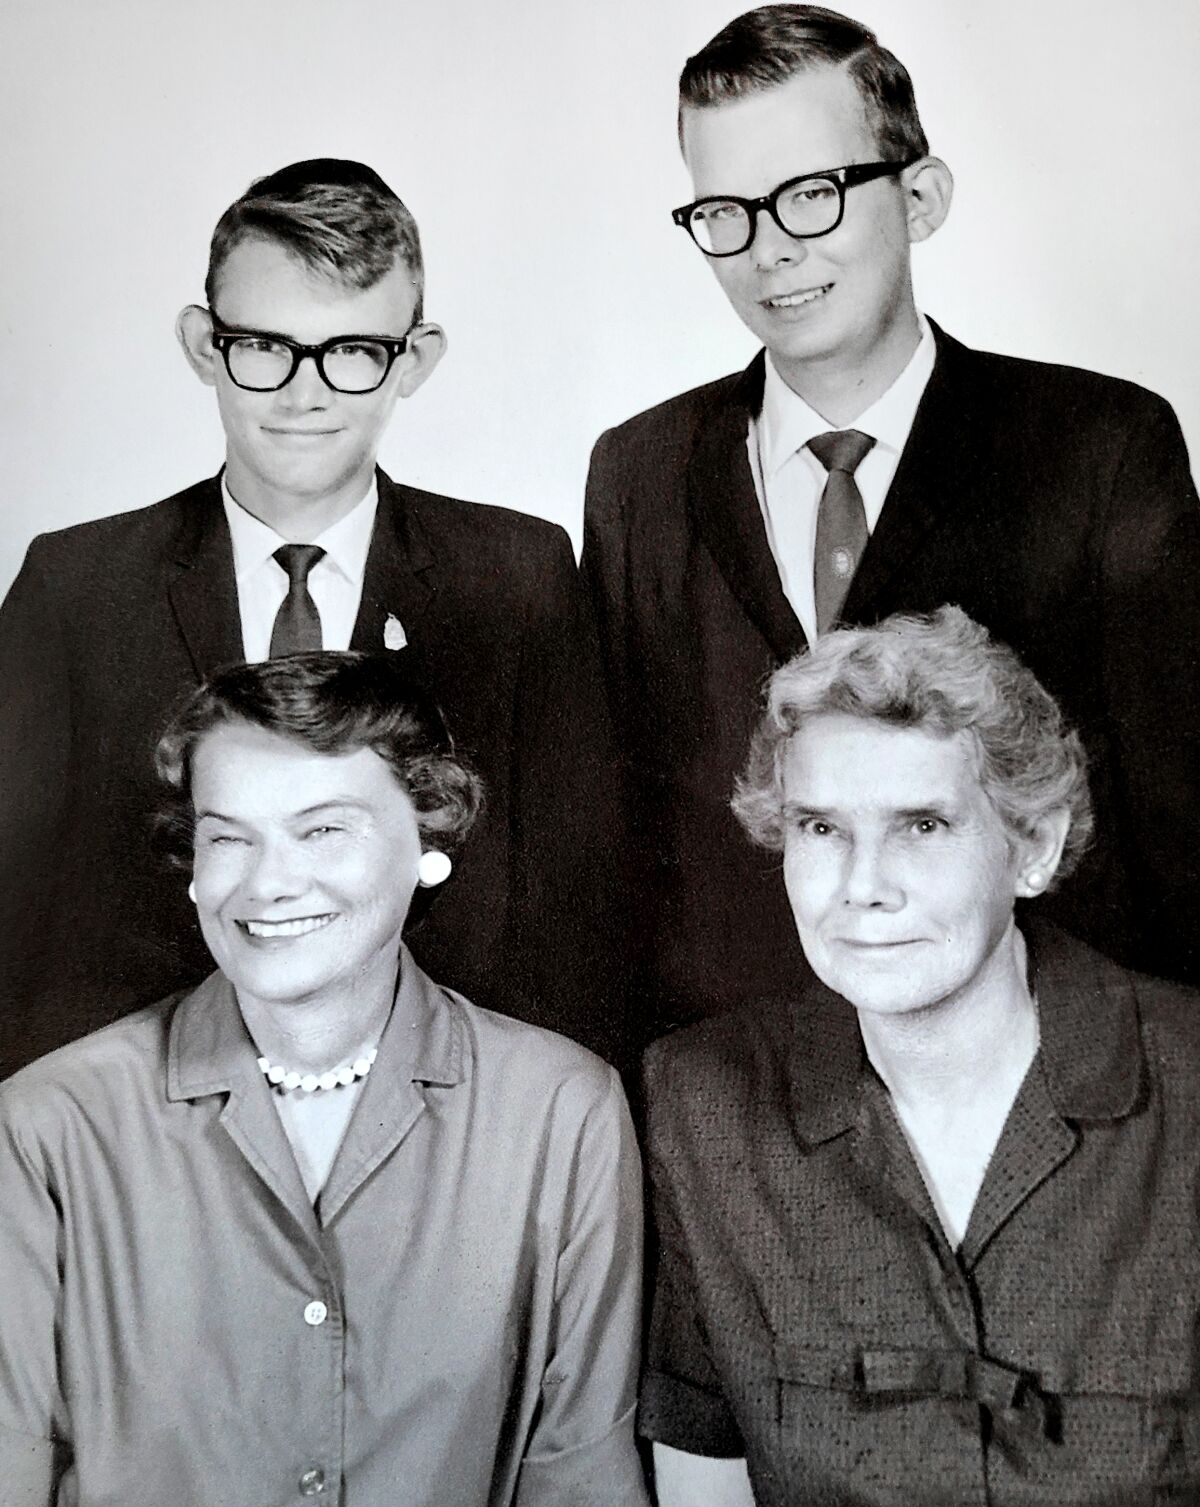 In their youth, Mike and Don Hunt, in horn-rimmed glasses and suits, take a formal photo with their mom and grandmother.